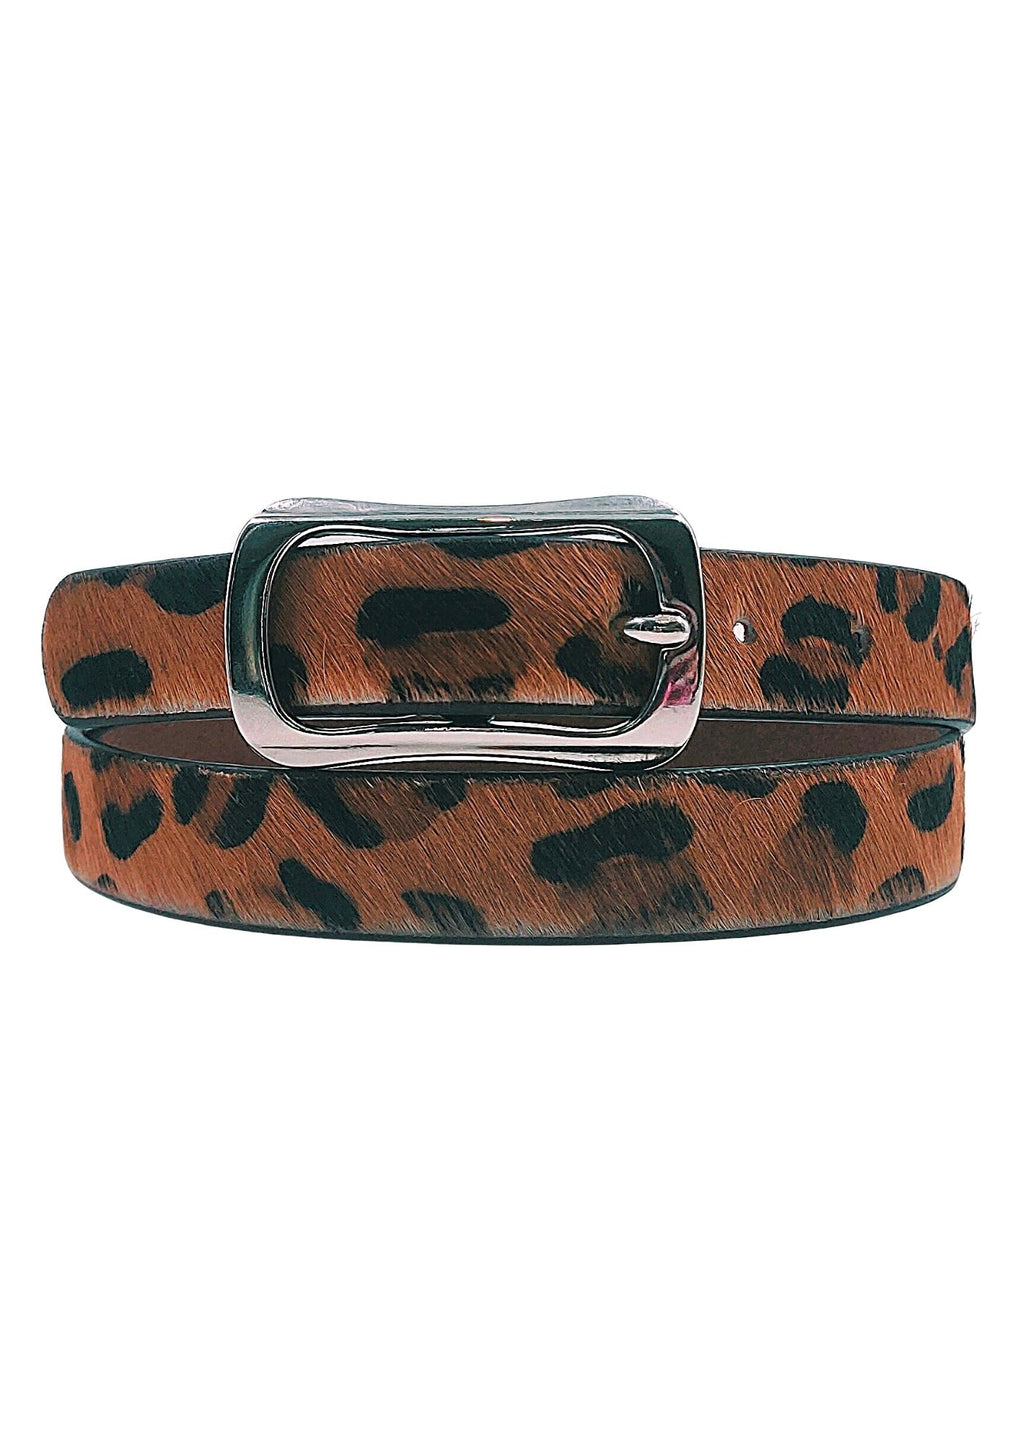 Leopard Hair-on Leather Belt With Silver Metallic Buckle (LB-1007_Brown)